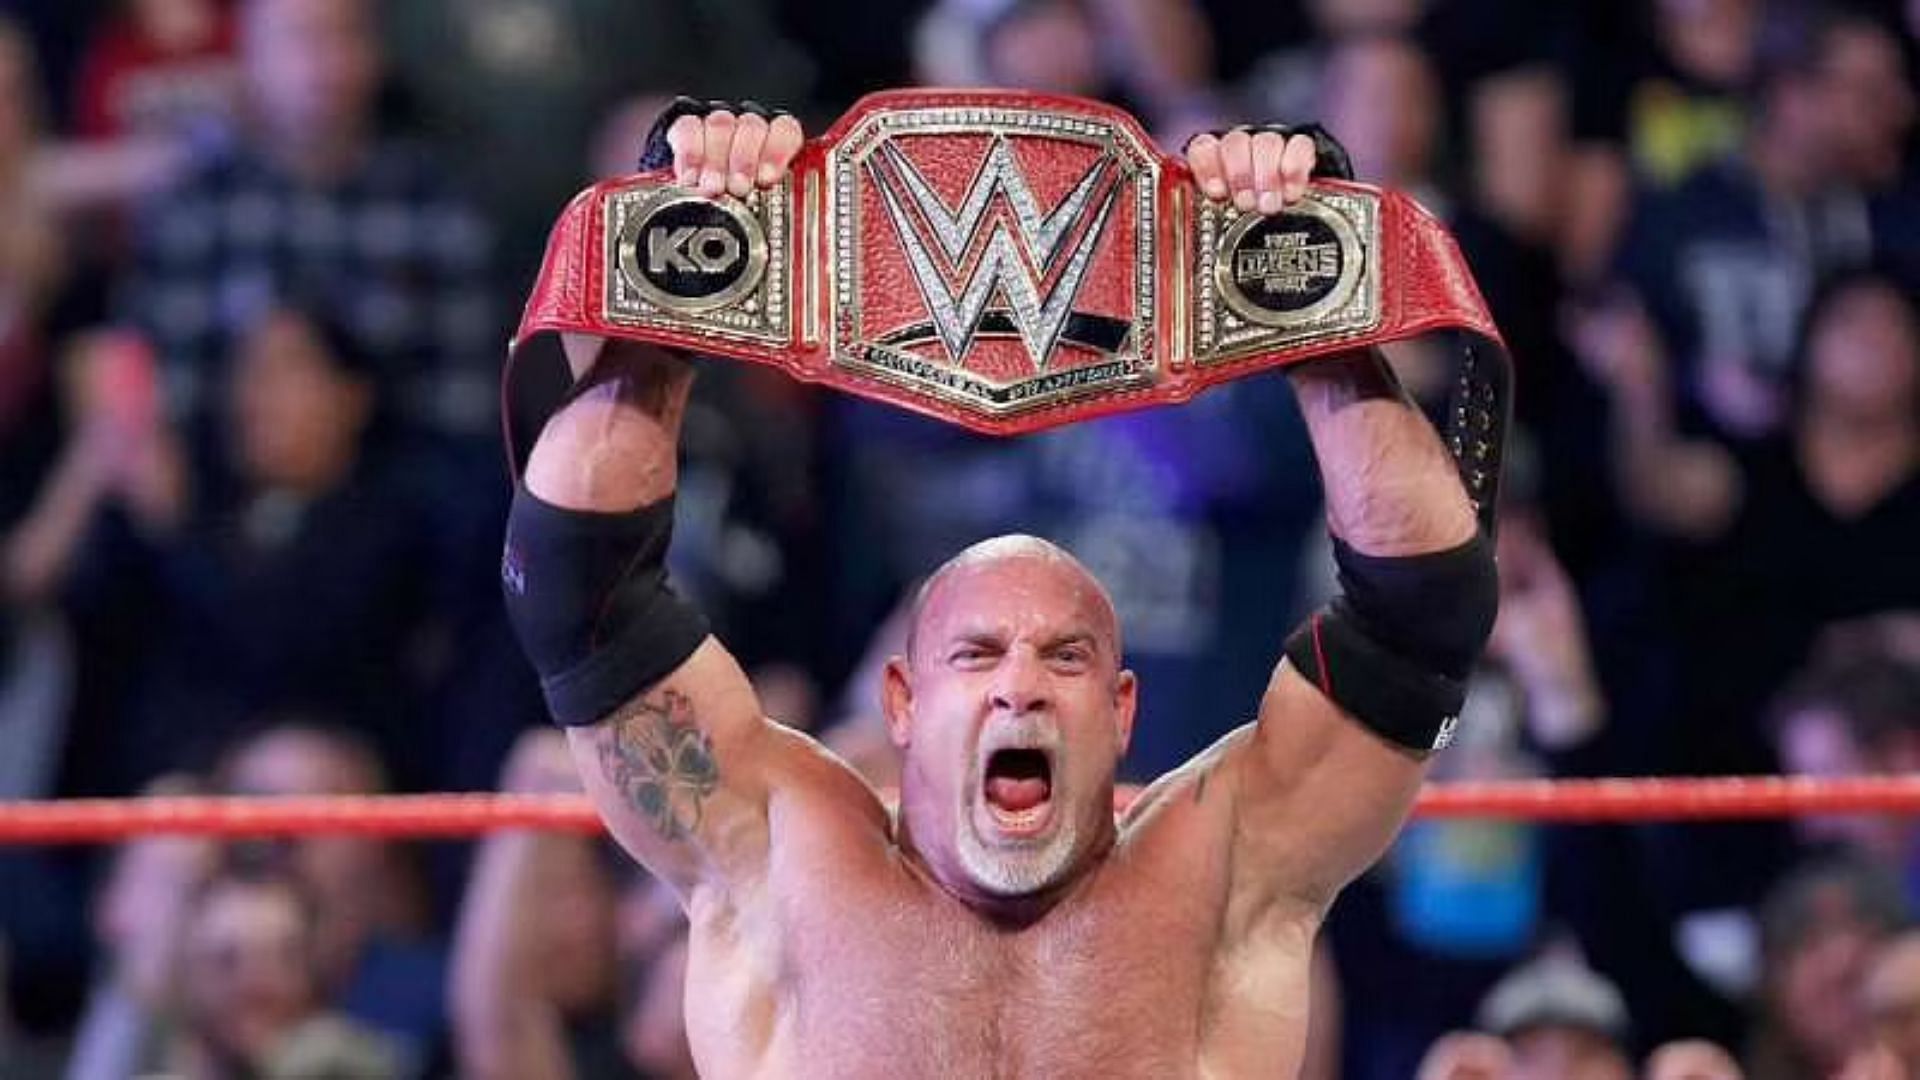 There will never be another Goldberg